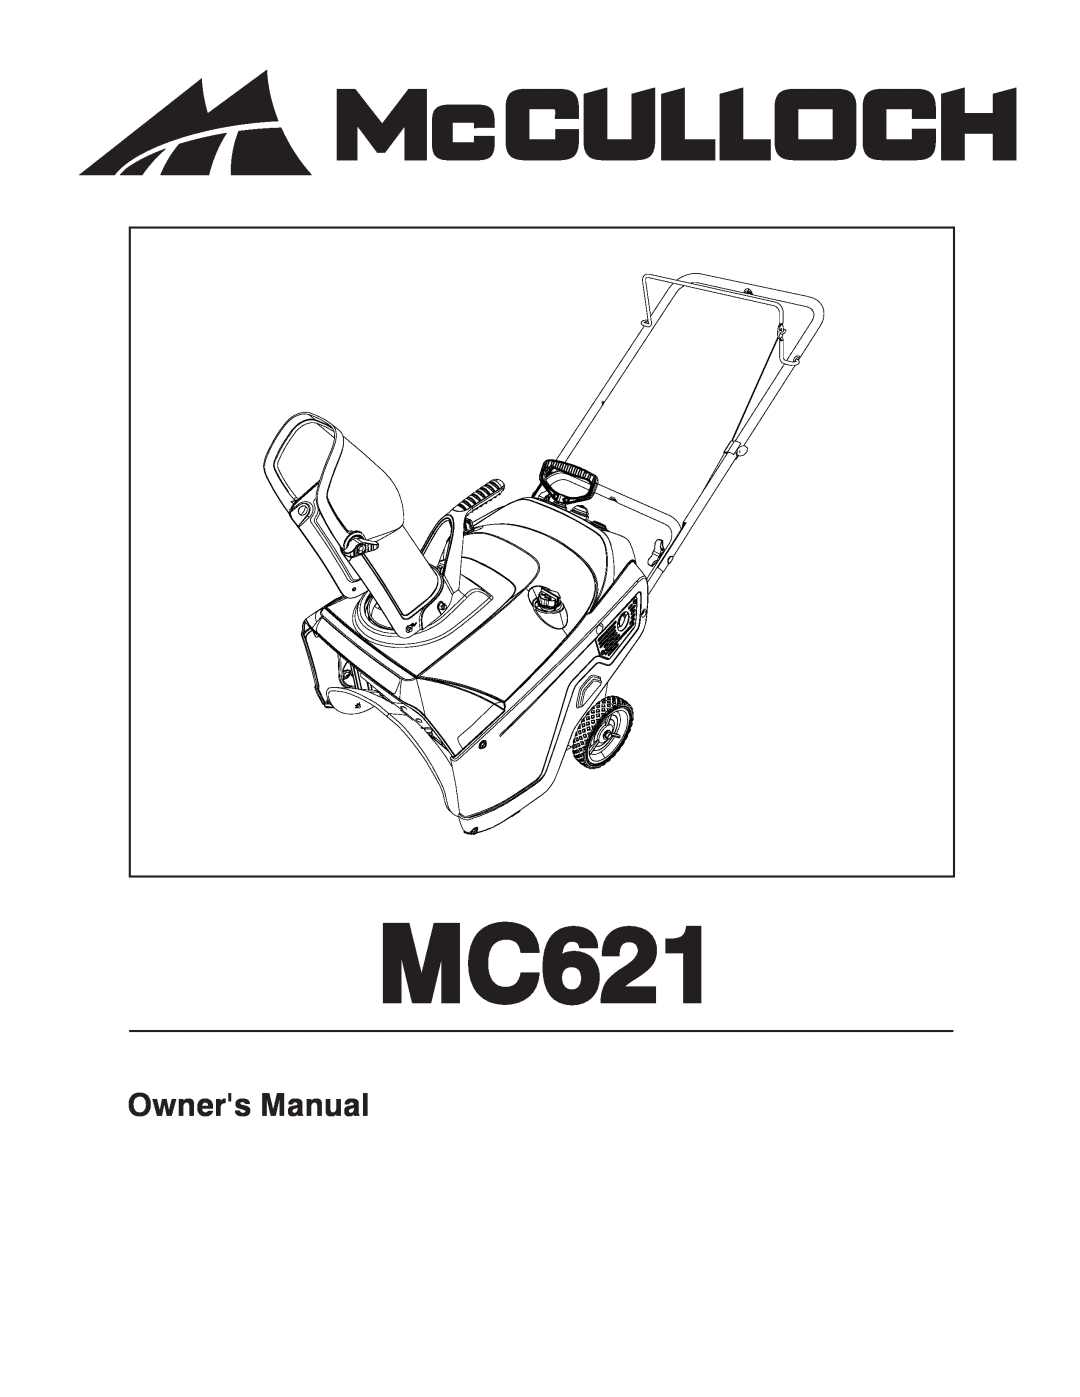 McCulloch 96188000300 owner manual MC621 